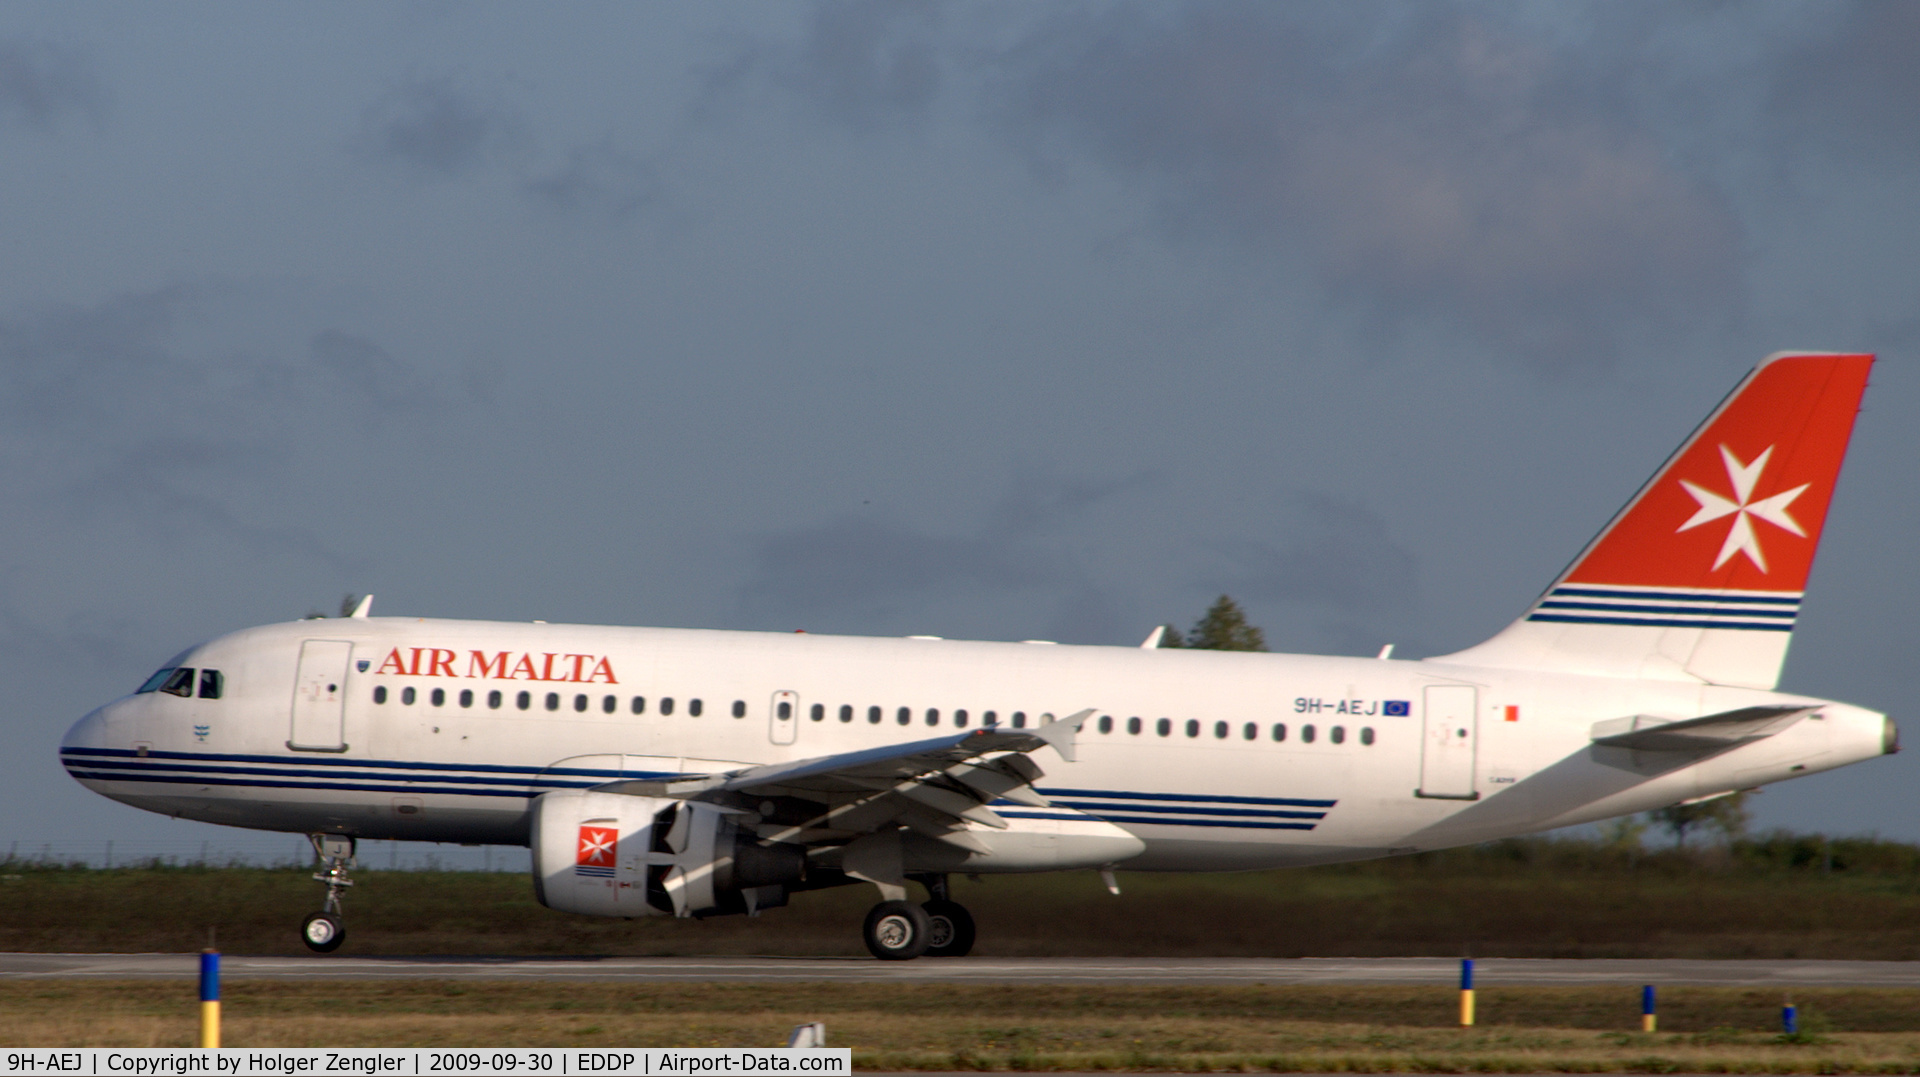 9H-AEJ, 2004 Airbus A319-112 C/N 2186, Three times a week to and from Malta